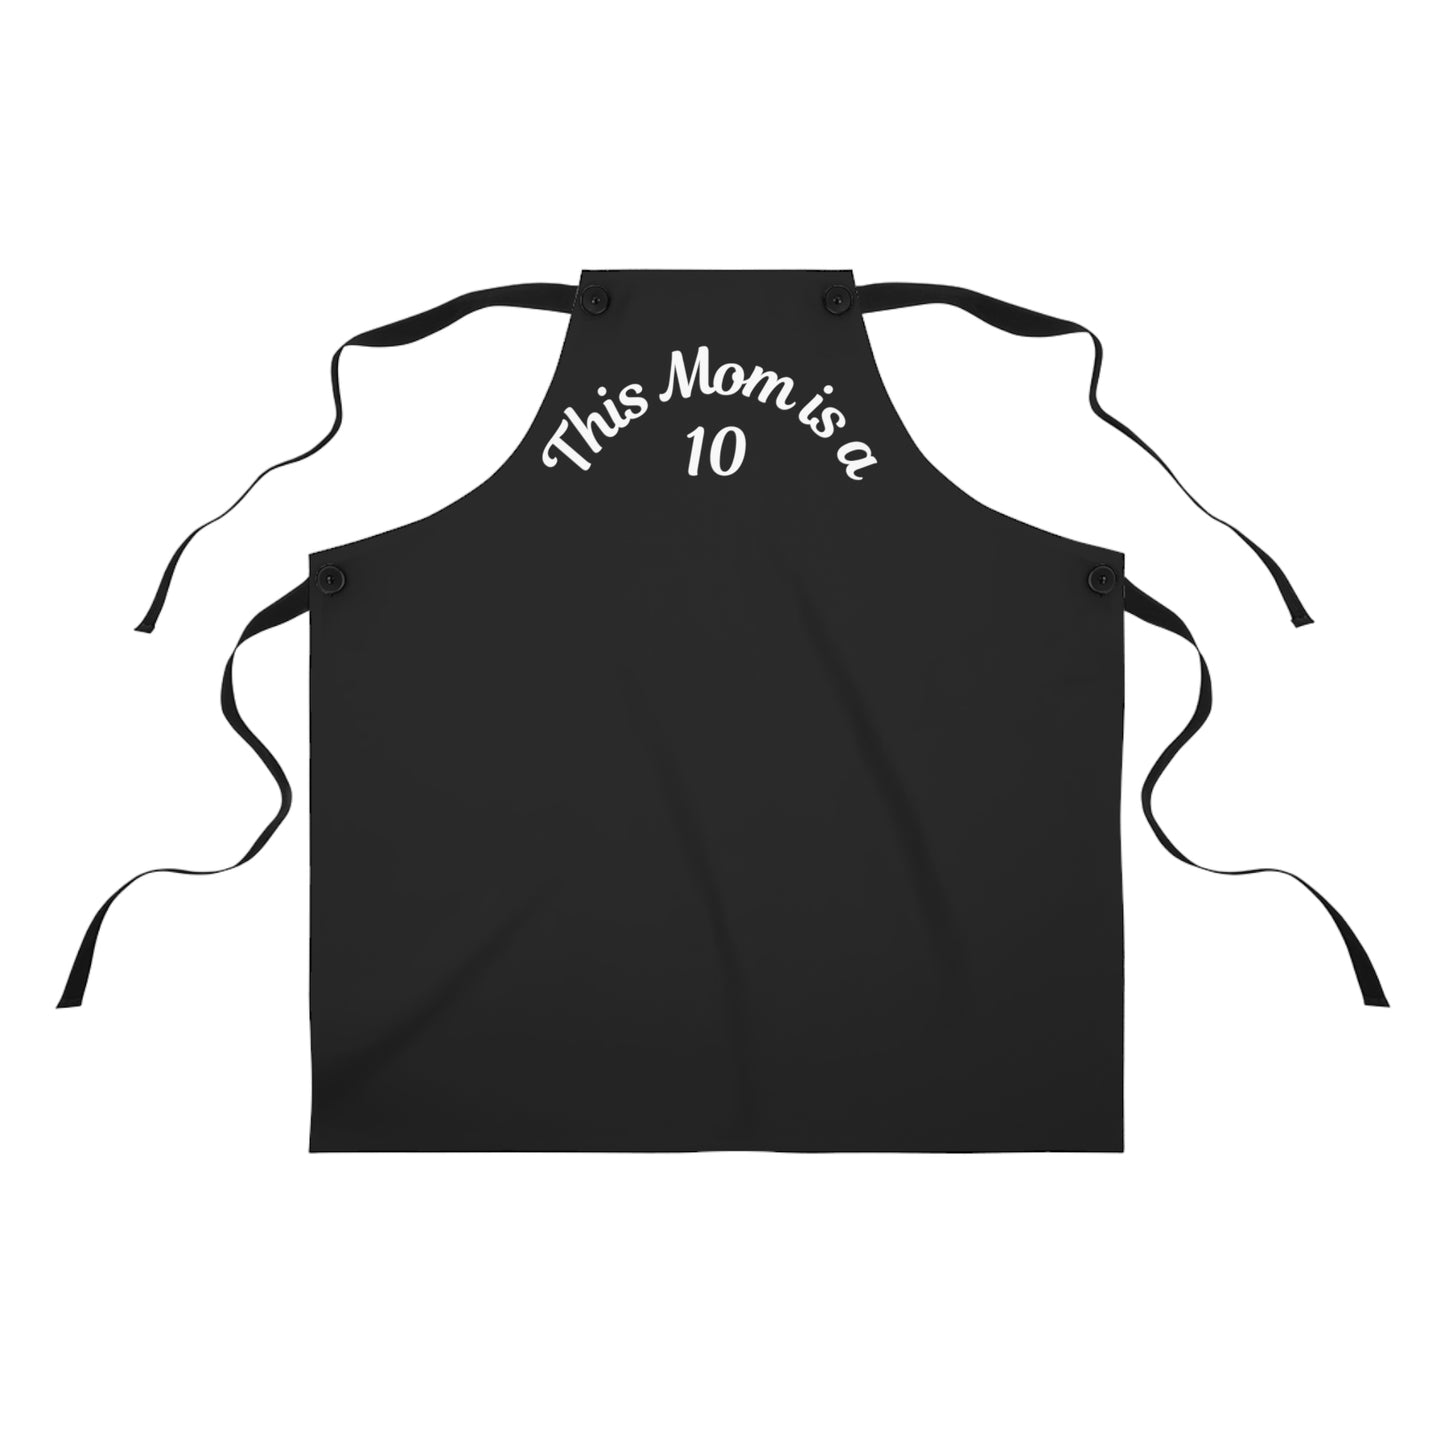 This Mom is A 10 Apron Black with White Lettering